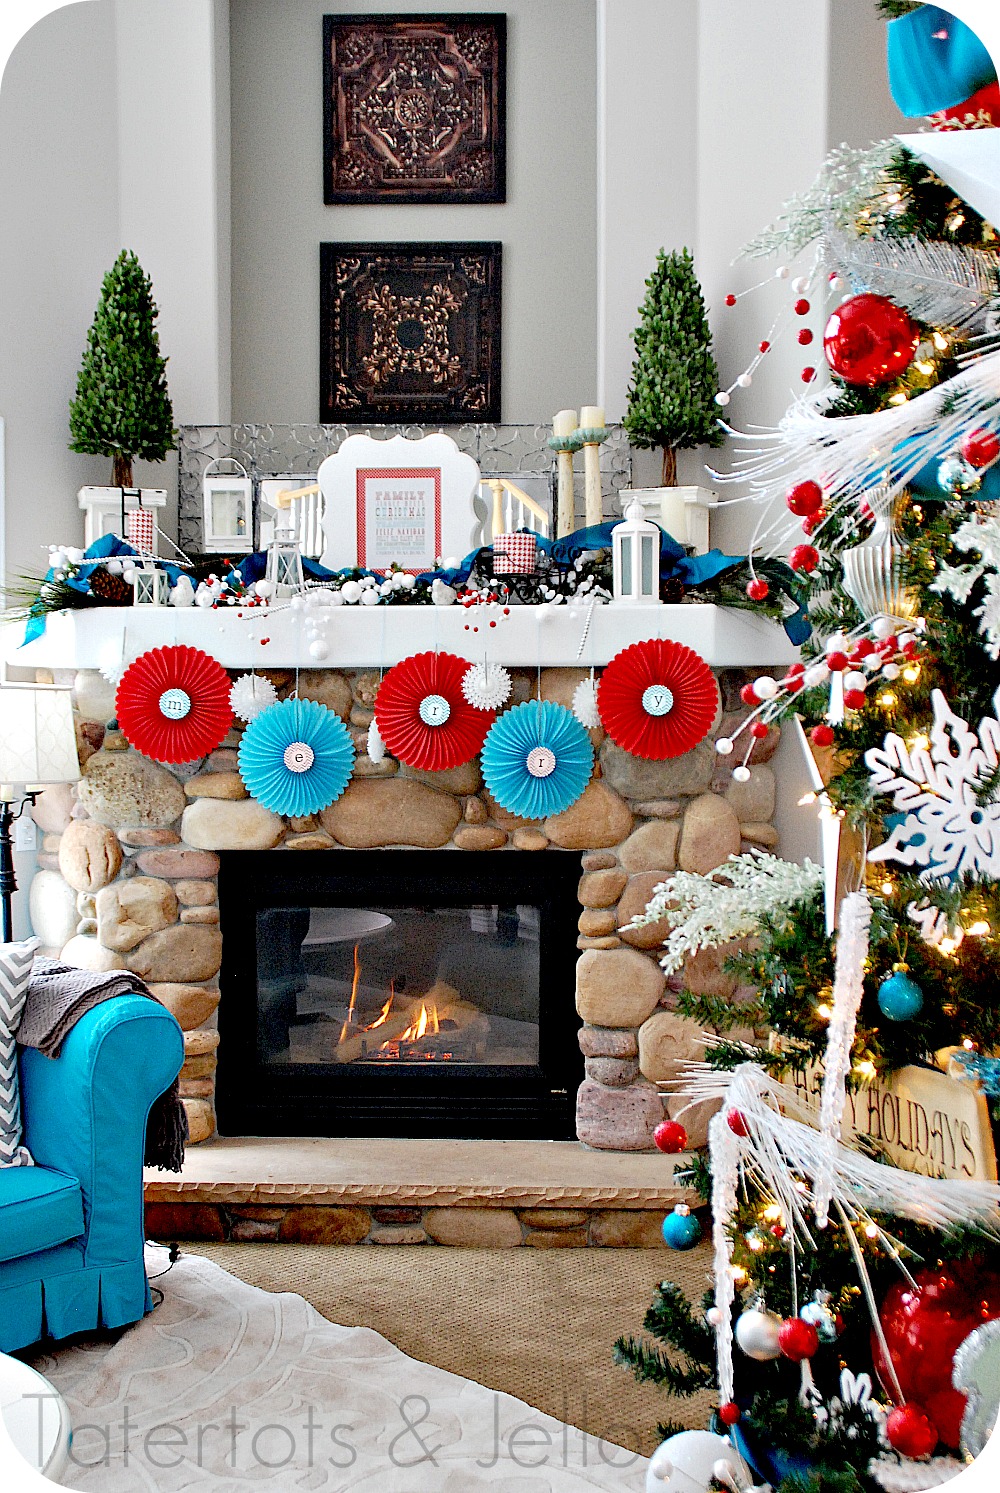 Spreading Holiday Cheer through Decorating – my Holiday home!